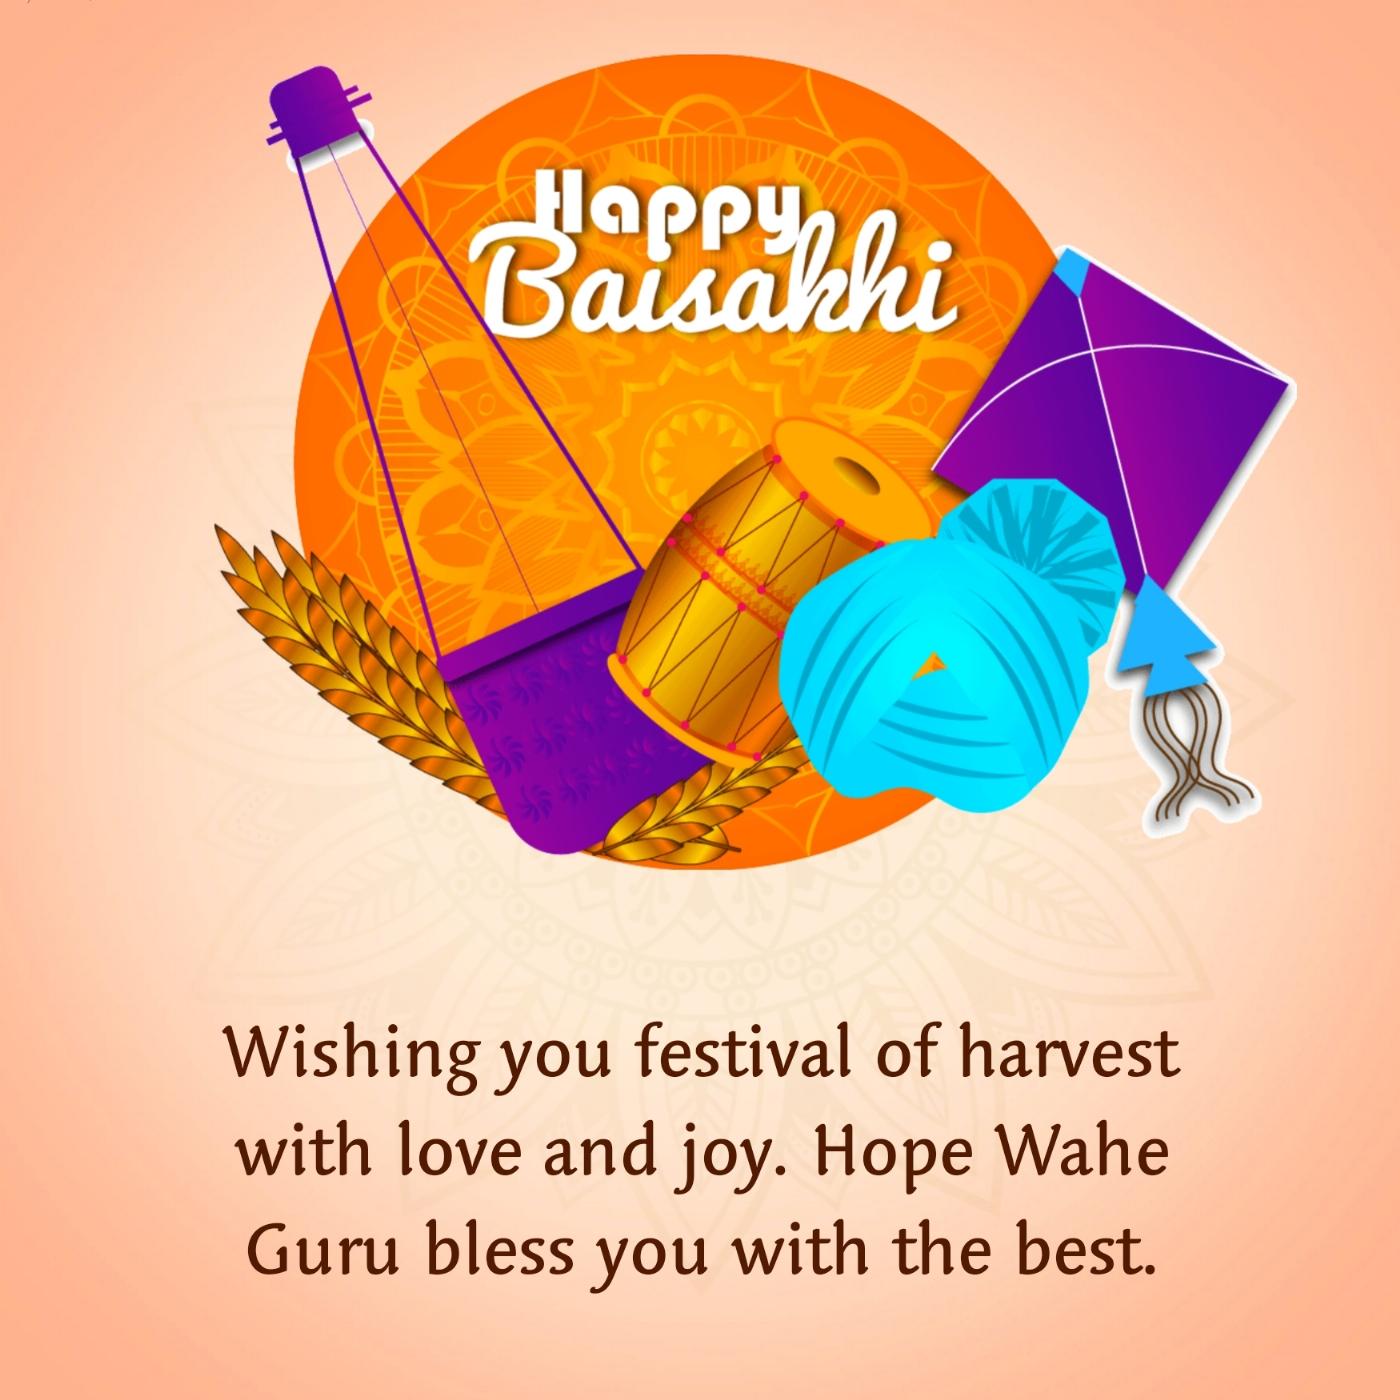 Wishing you festival of harvest with love and joy